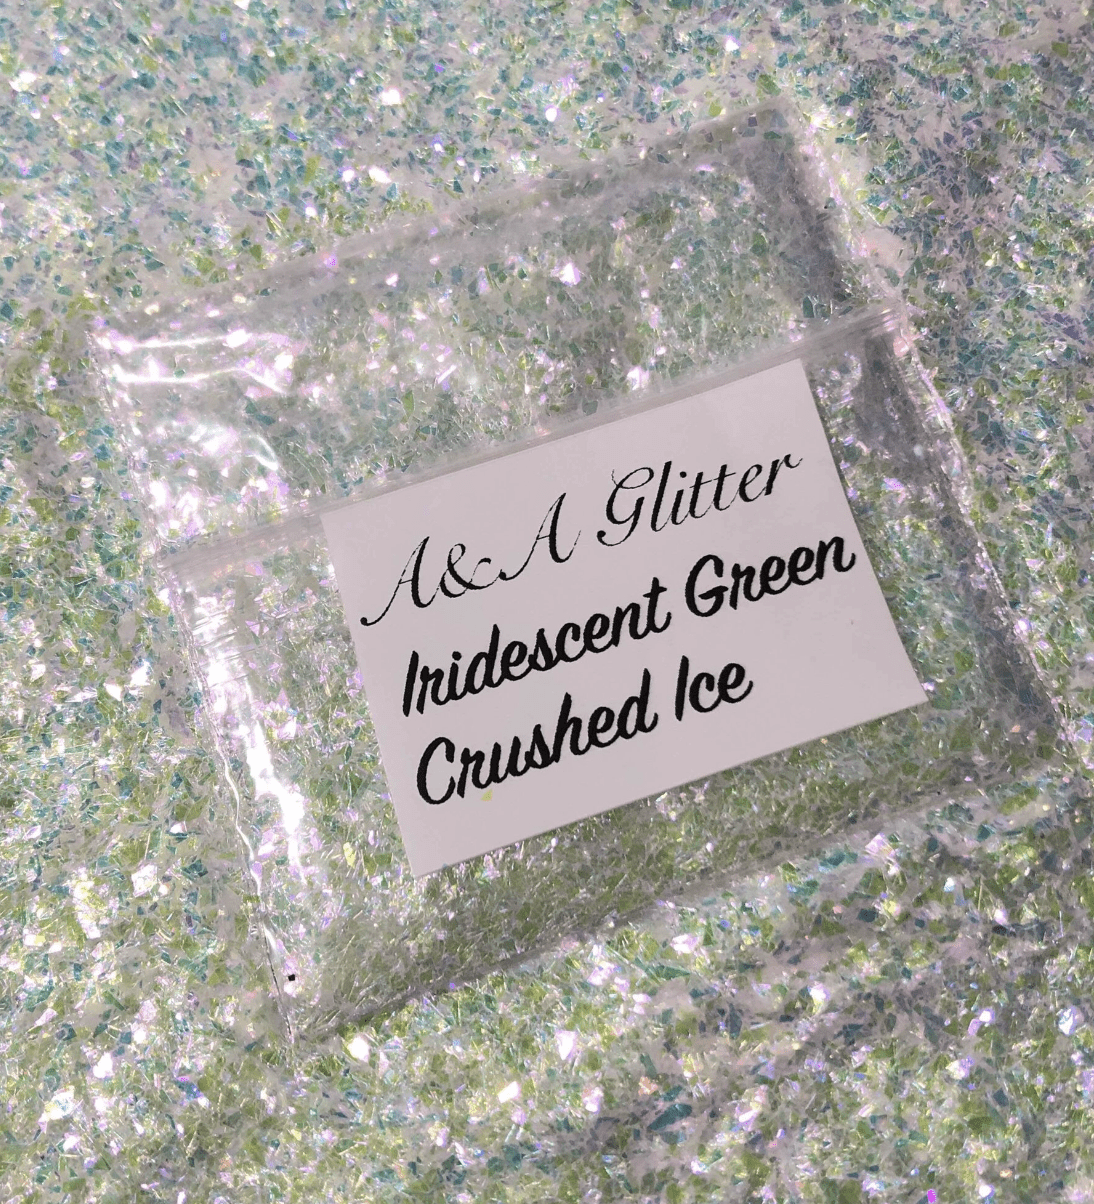 Crushed Ice - Collection